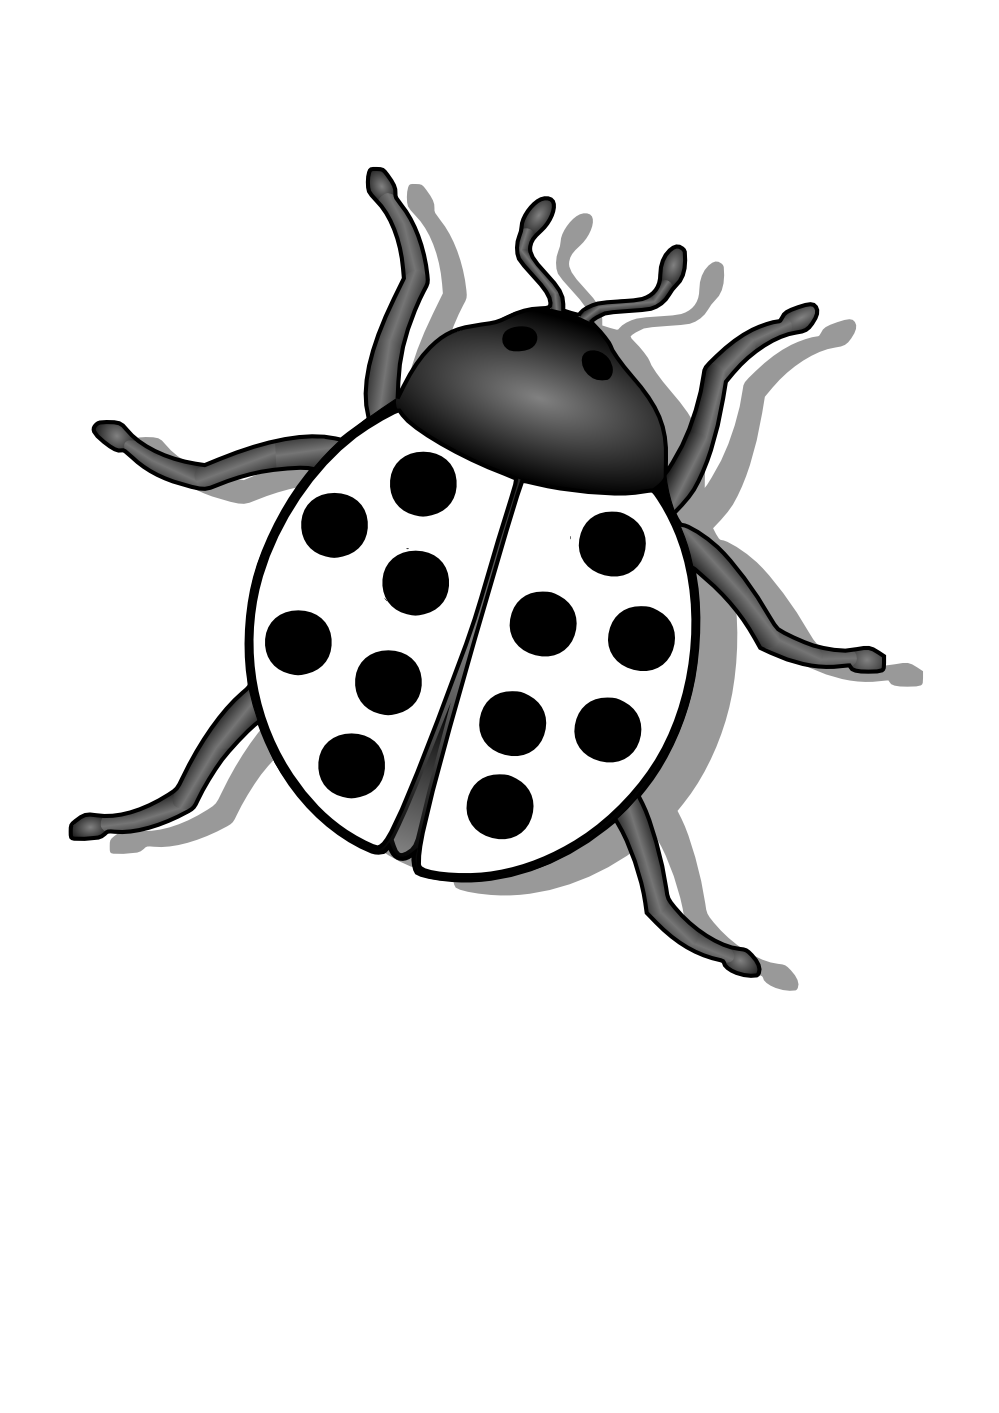 Bugs png black and. Insect clipart line art